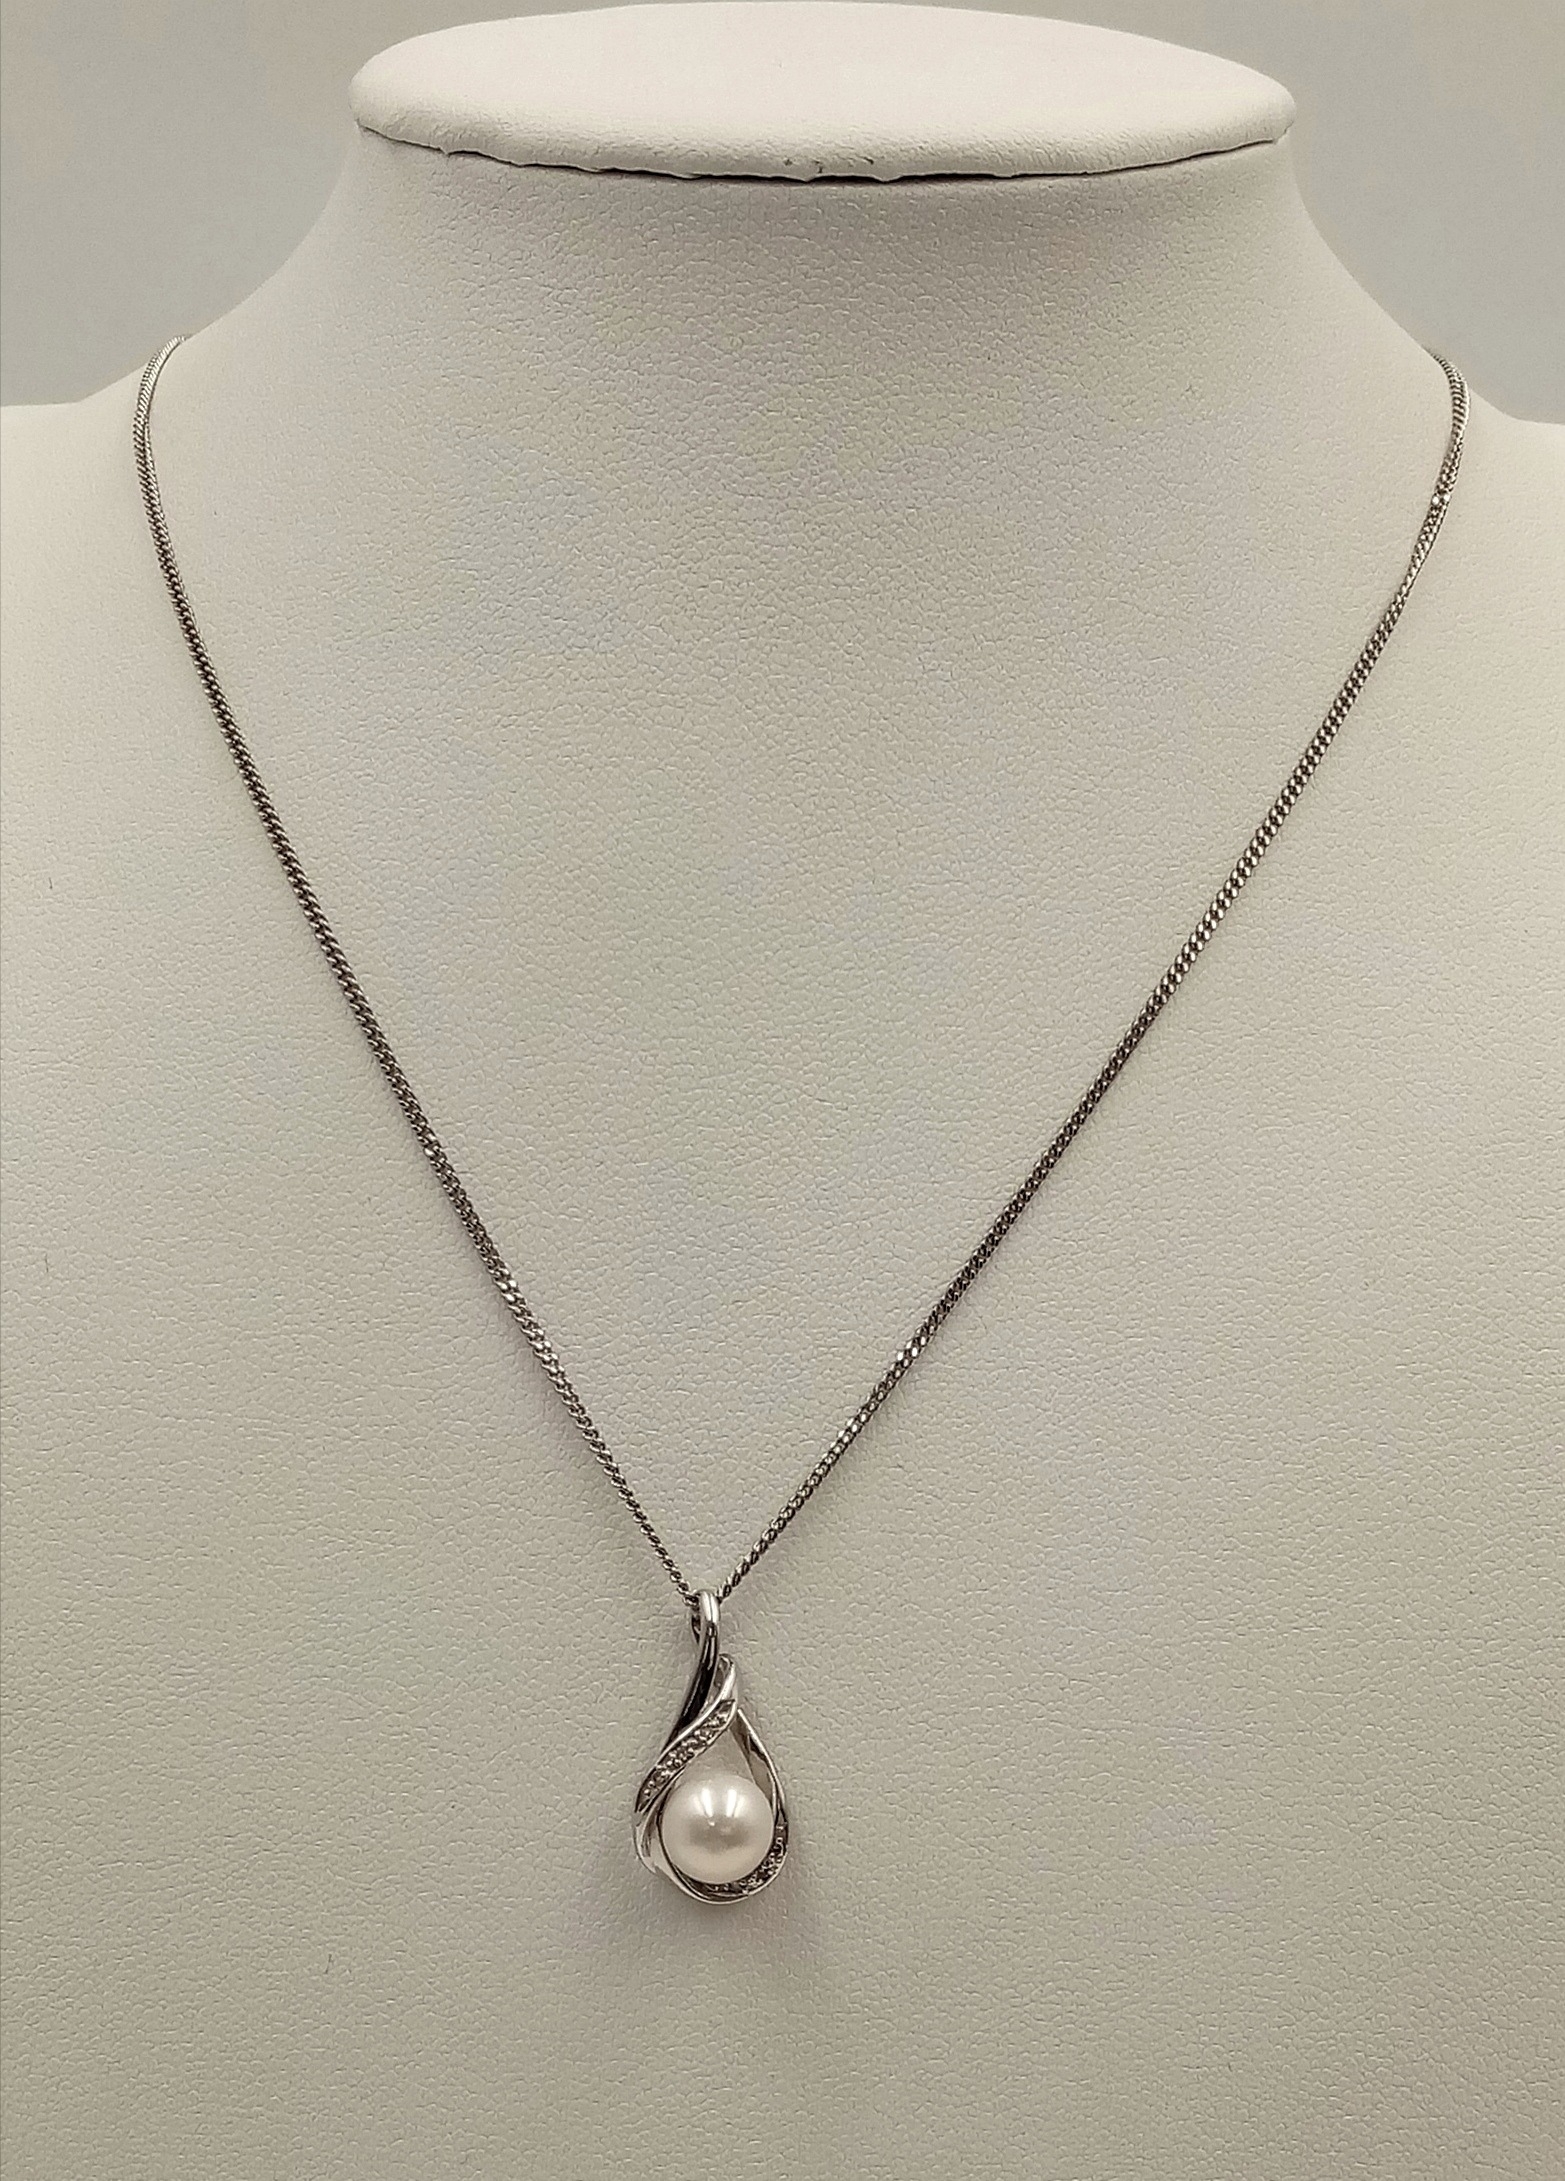 A 9ct White Gold Diamond and Pearl Necklace, 6mm pearl size, 0.05ct diamond, 20” chain length, 4. - Image 3 of 4